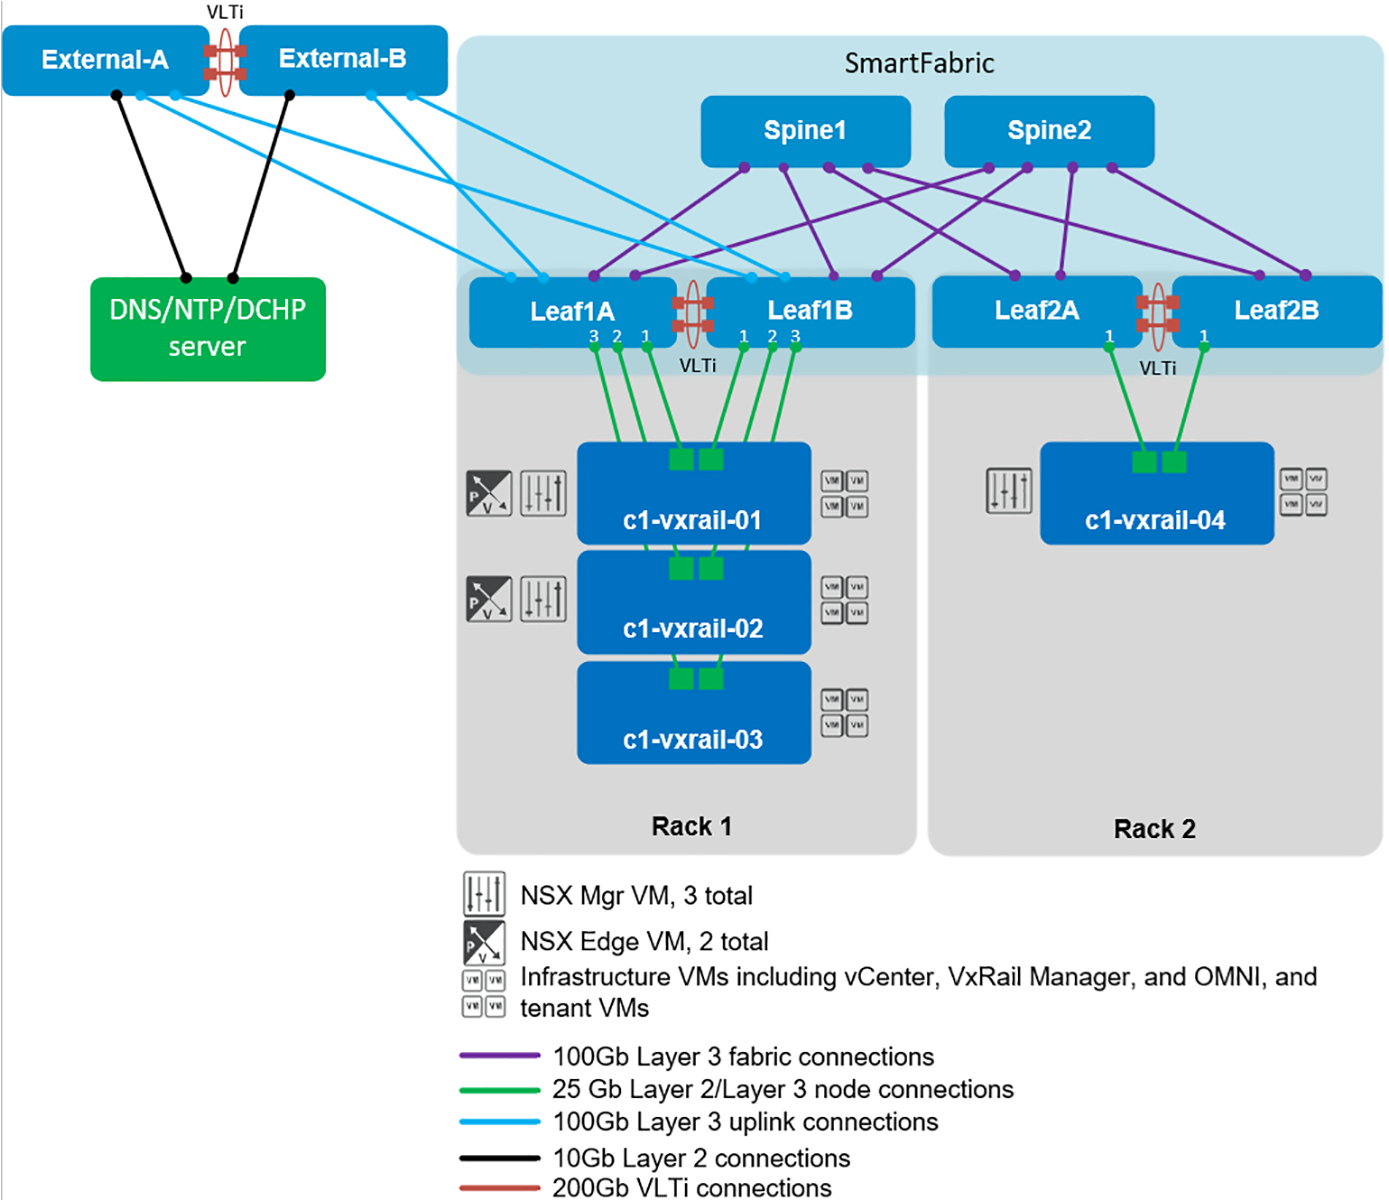 SmartFabric topology with connections to VxRail nodes and external network